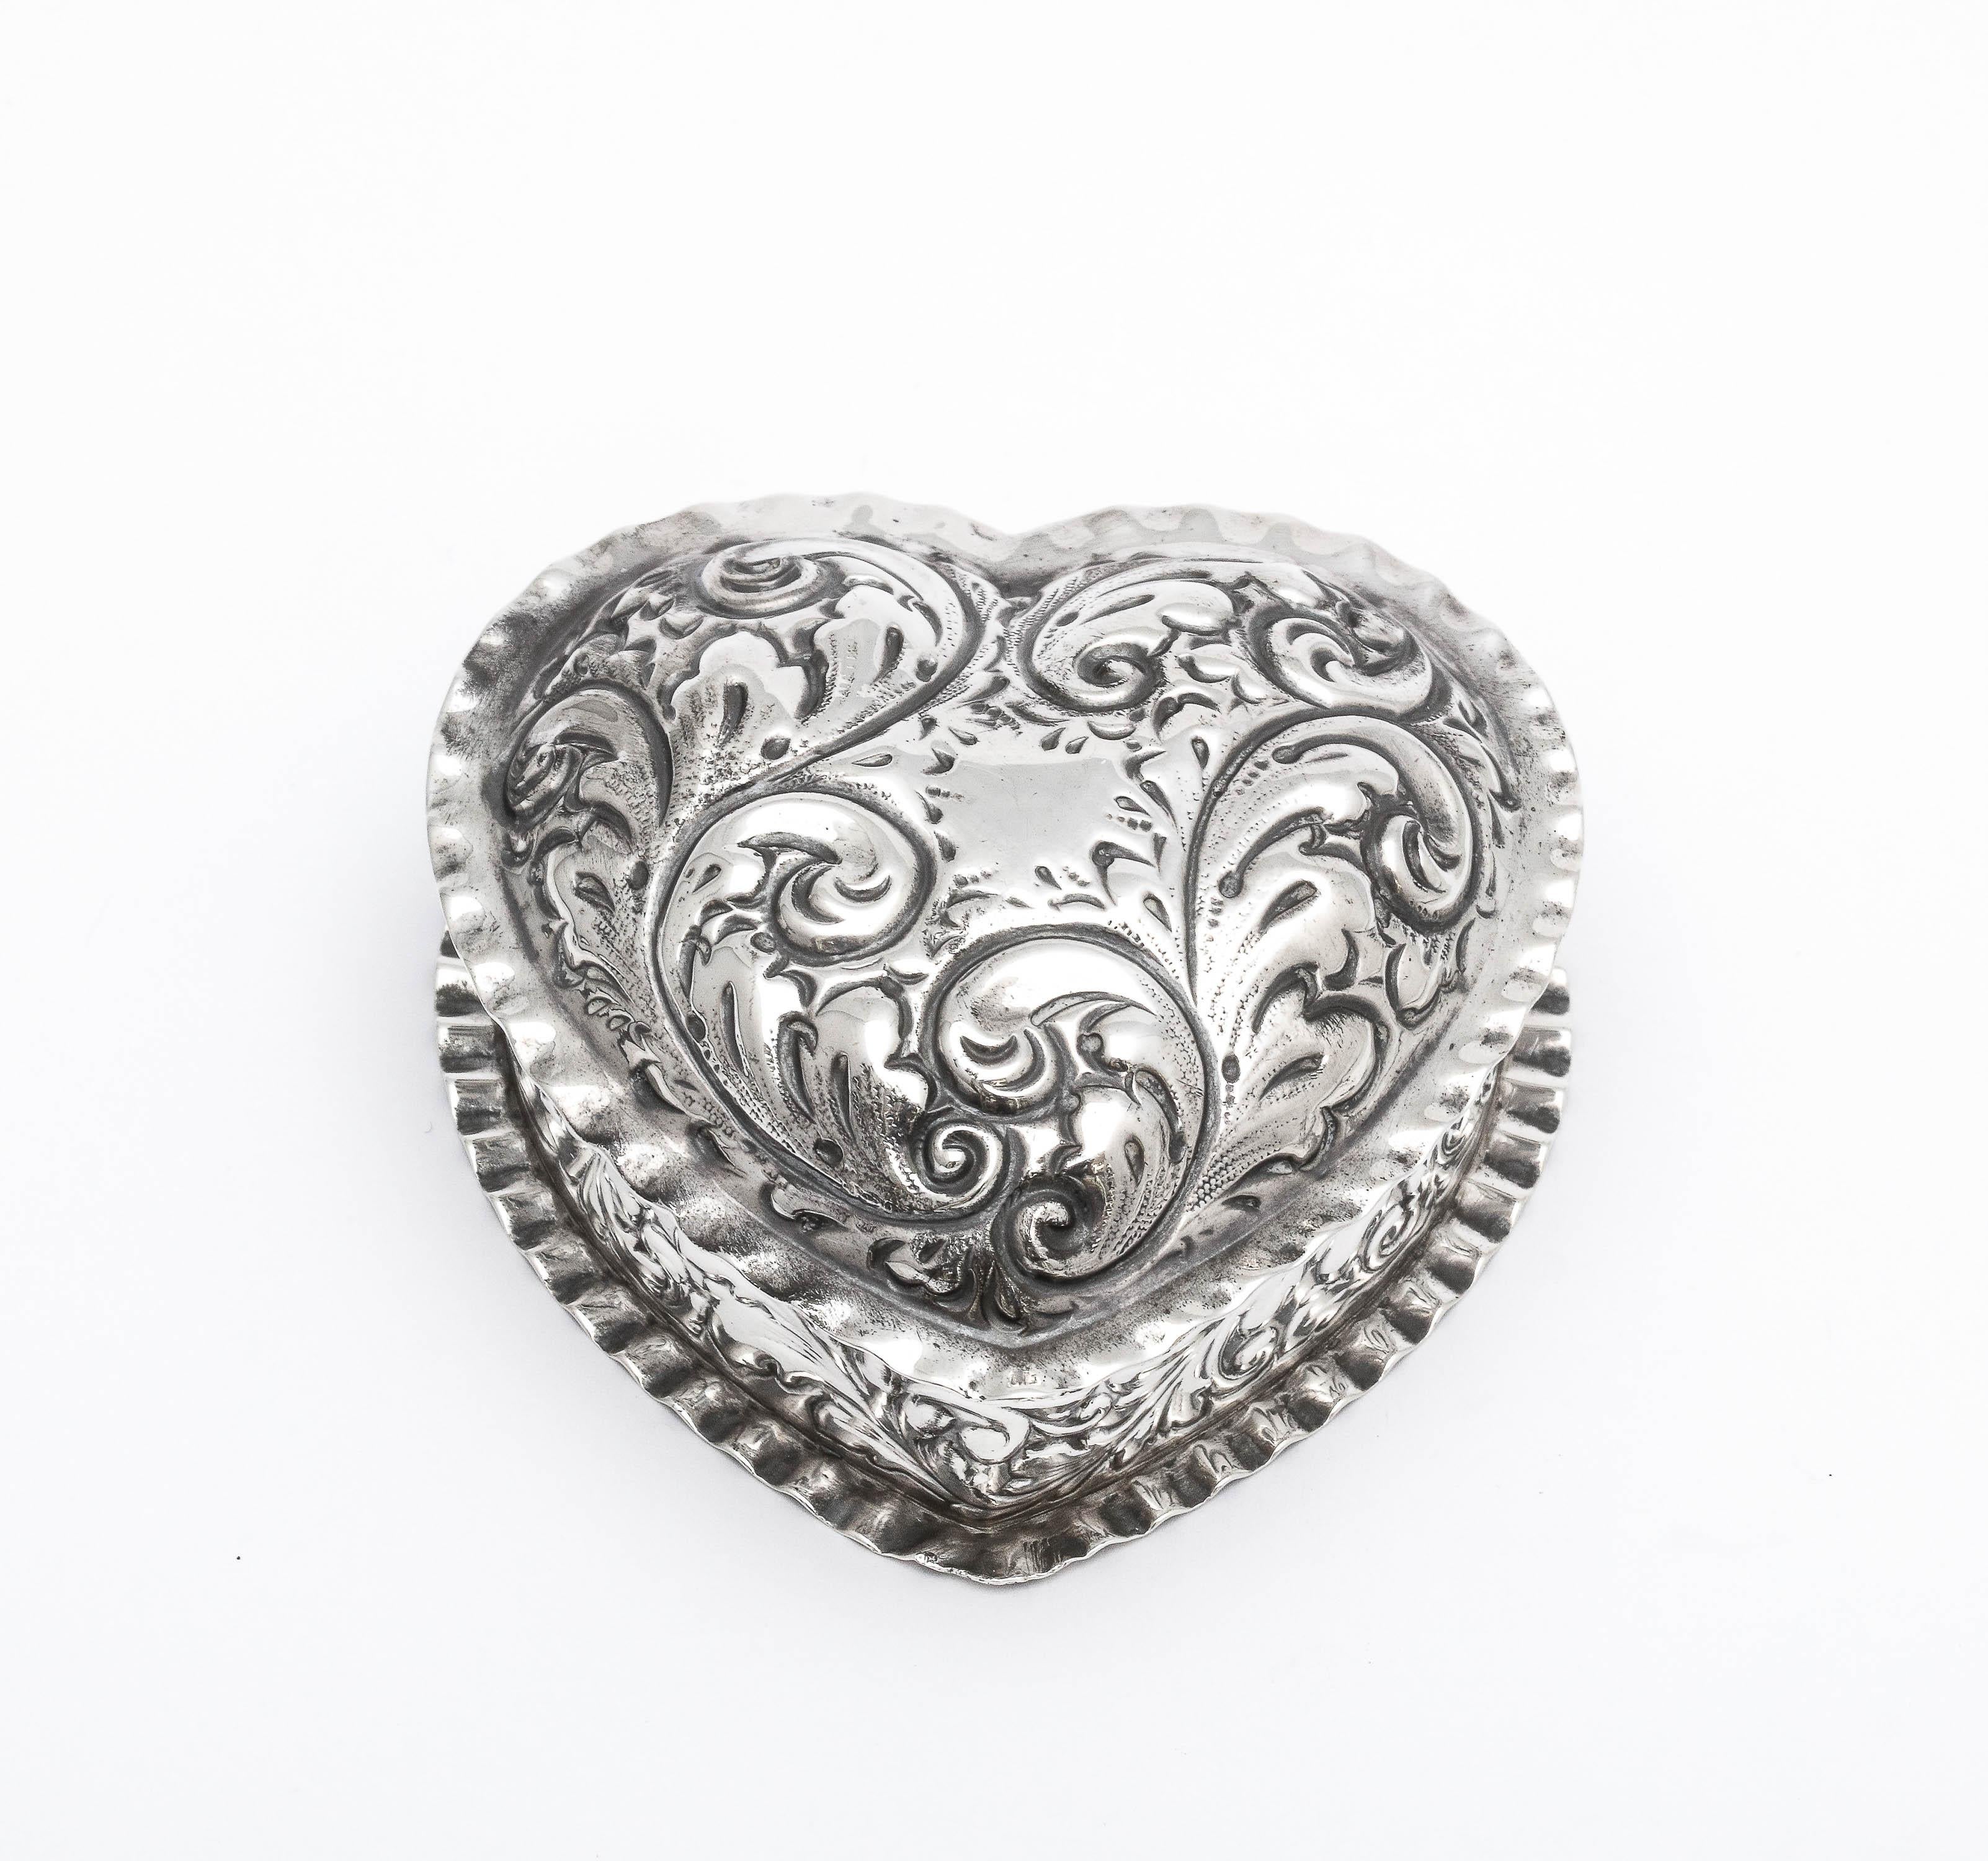 Victorian Period, sterling silver heart-form trinkets box, Gorham Manufacturing Company, Providence, Rhode Island, year-hallmarked for 1893. Measures 3 inches wide (at widest point) x 3 inches deep (at deepest point) x 1 1/4 inches high (at highest